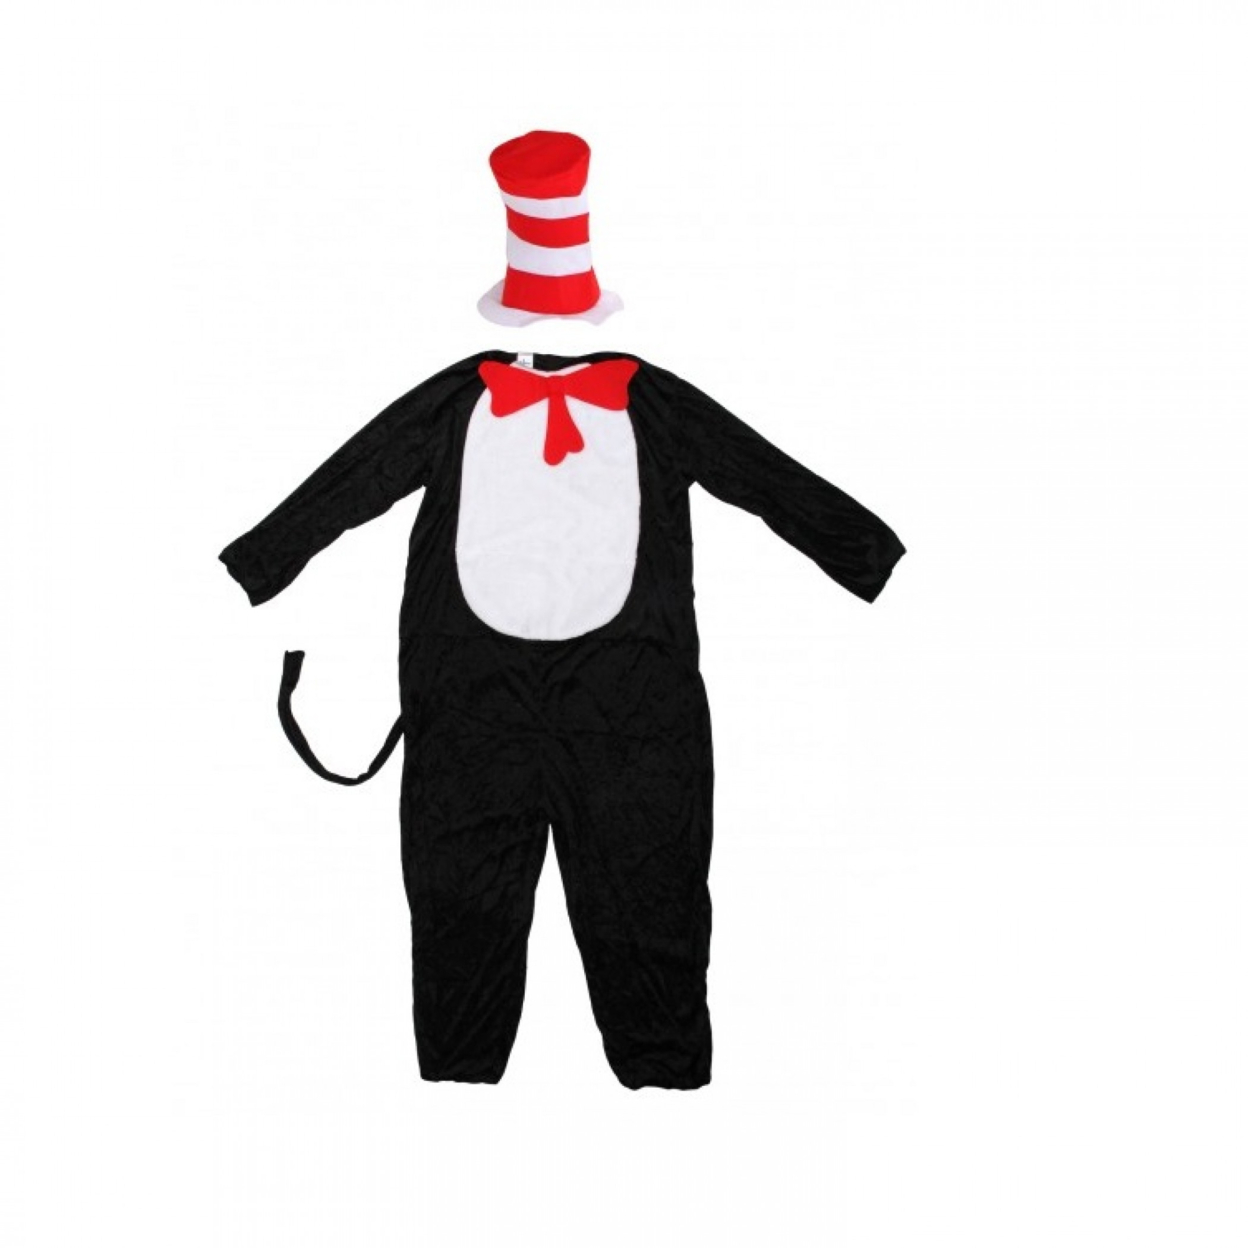 Dr. Seuss The Cat in the Hat Costume Mens